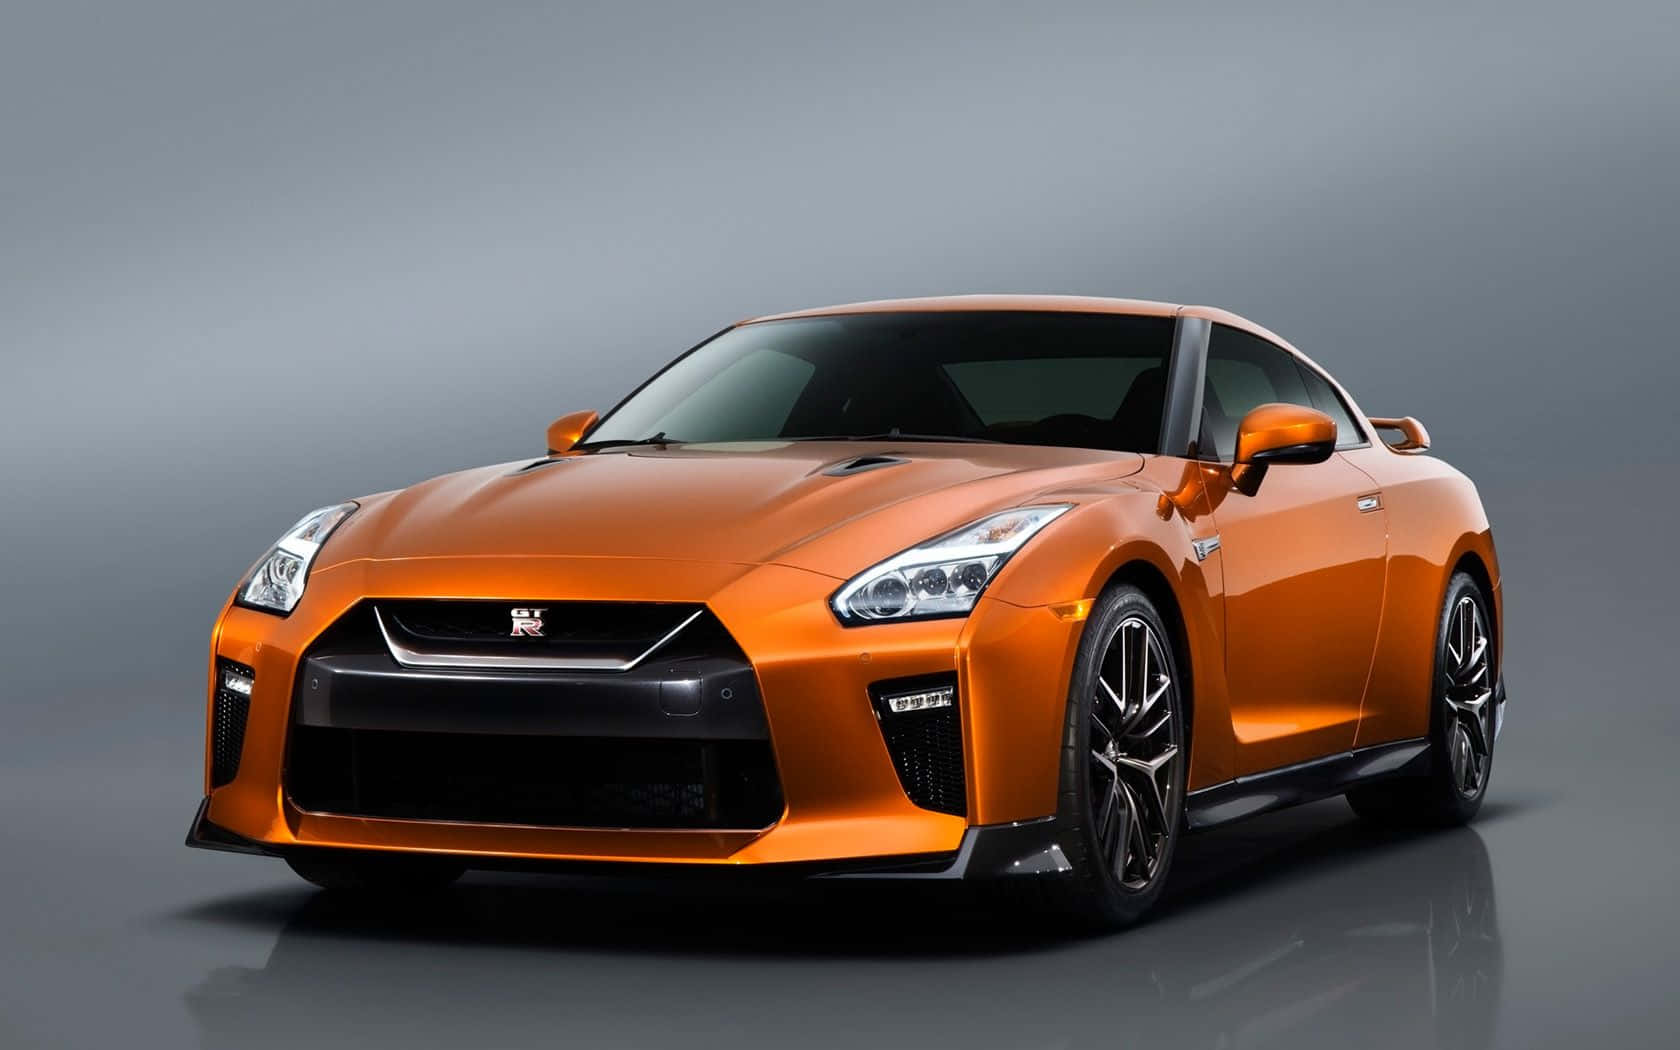 This Cool Gtr Will Make You Feel Like A Formula One Driver Background